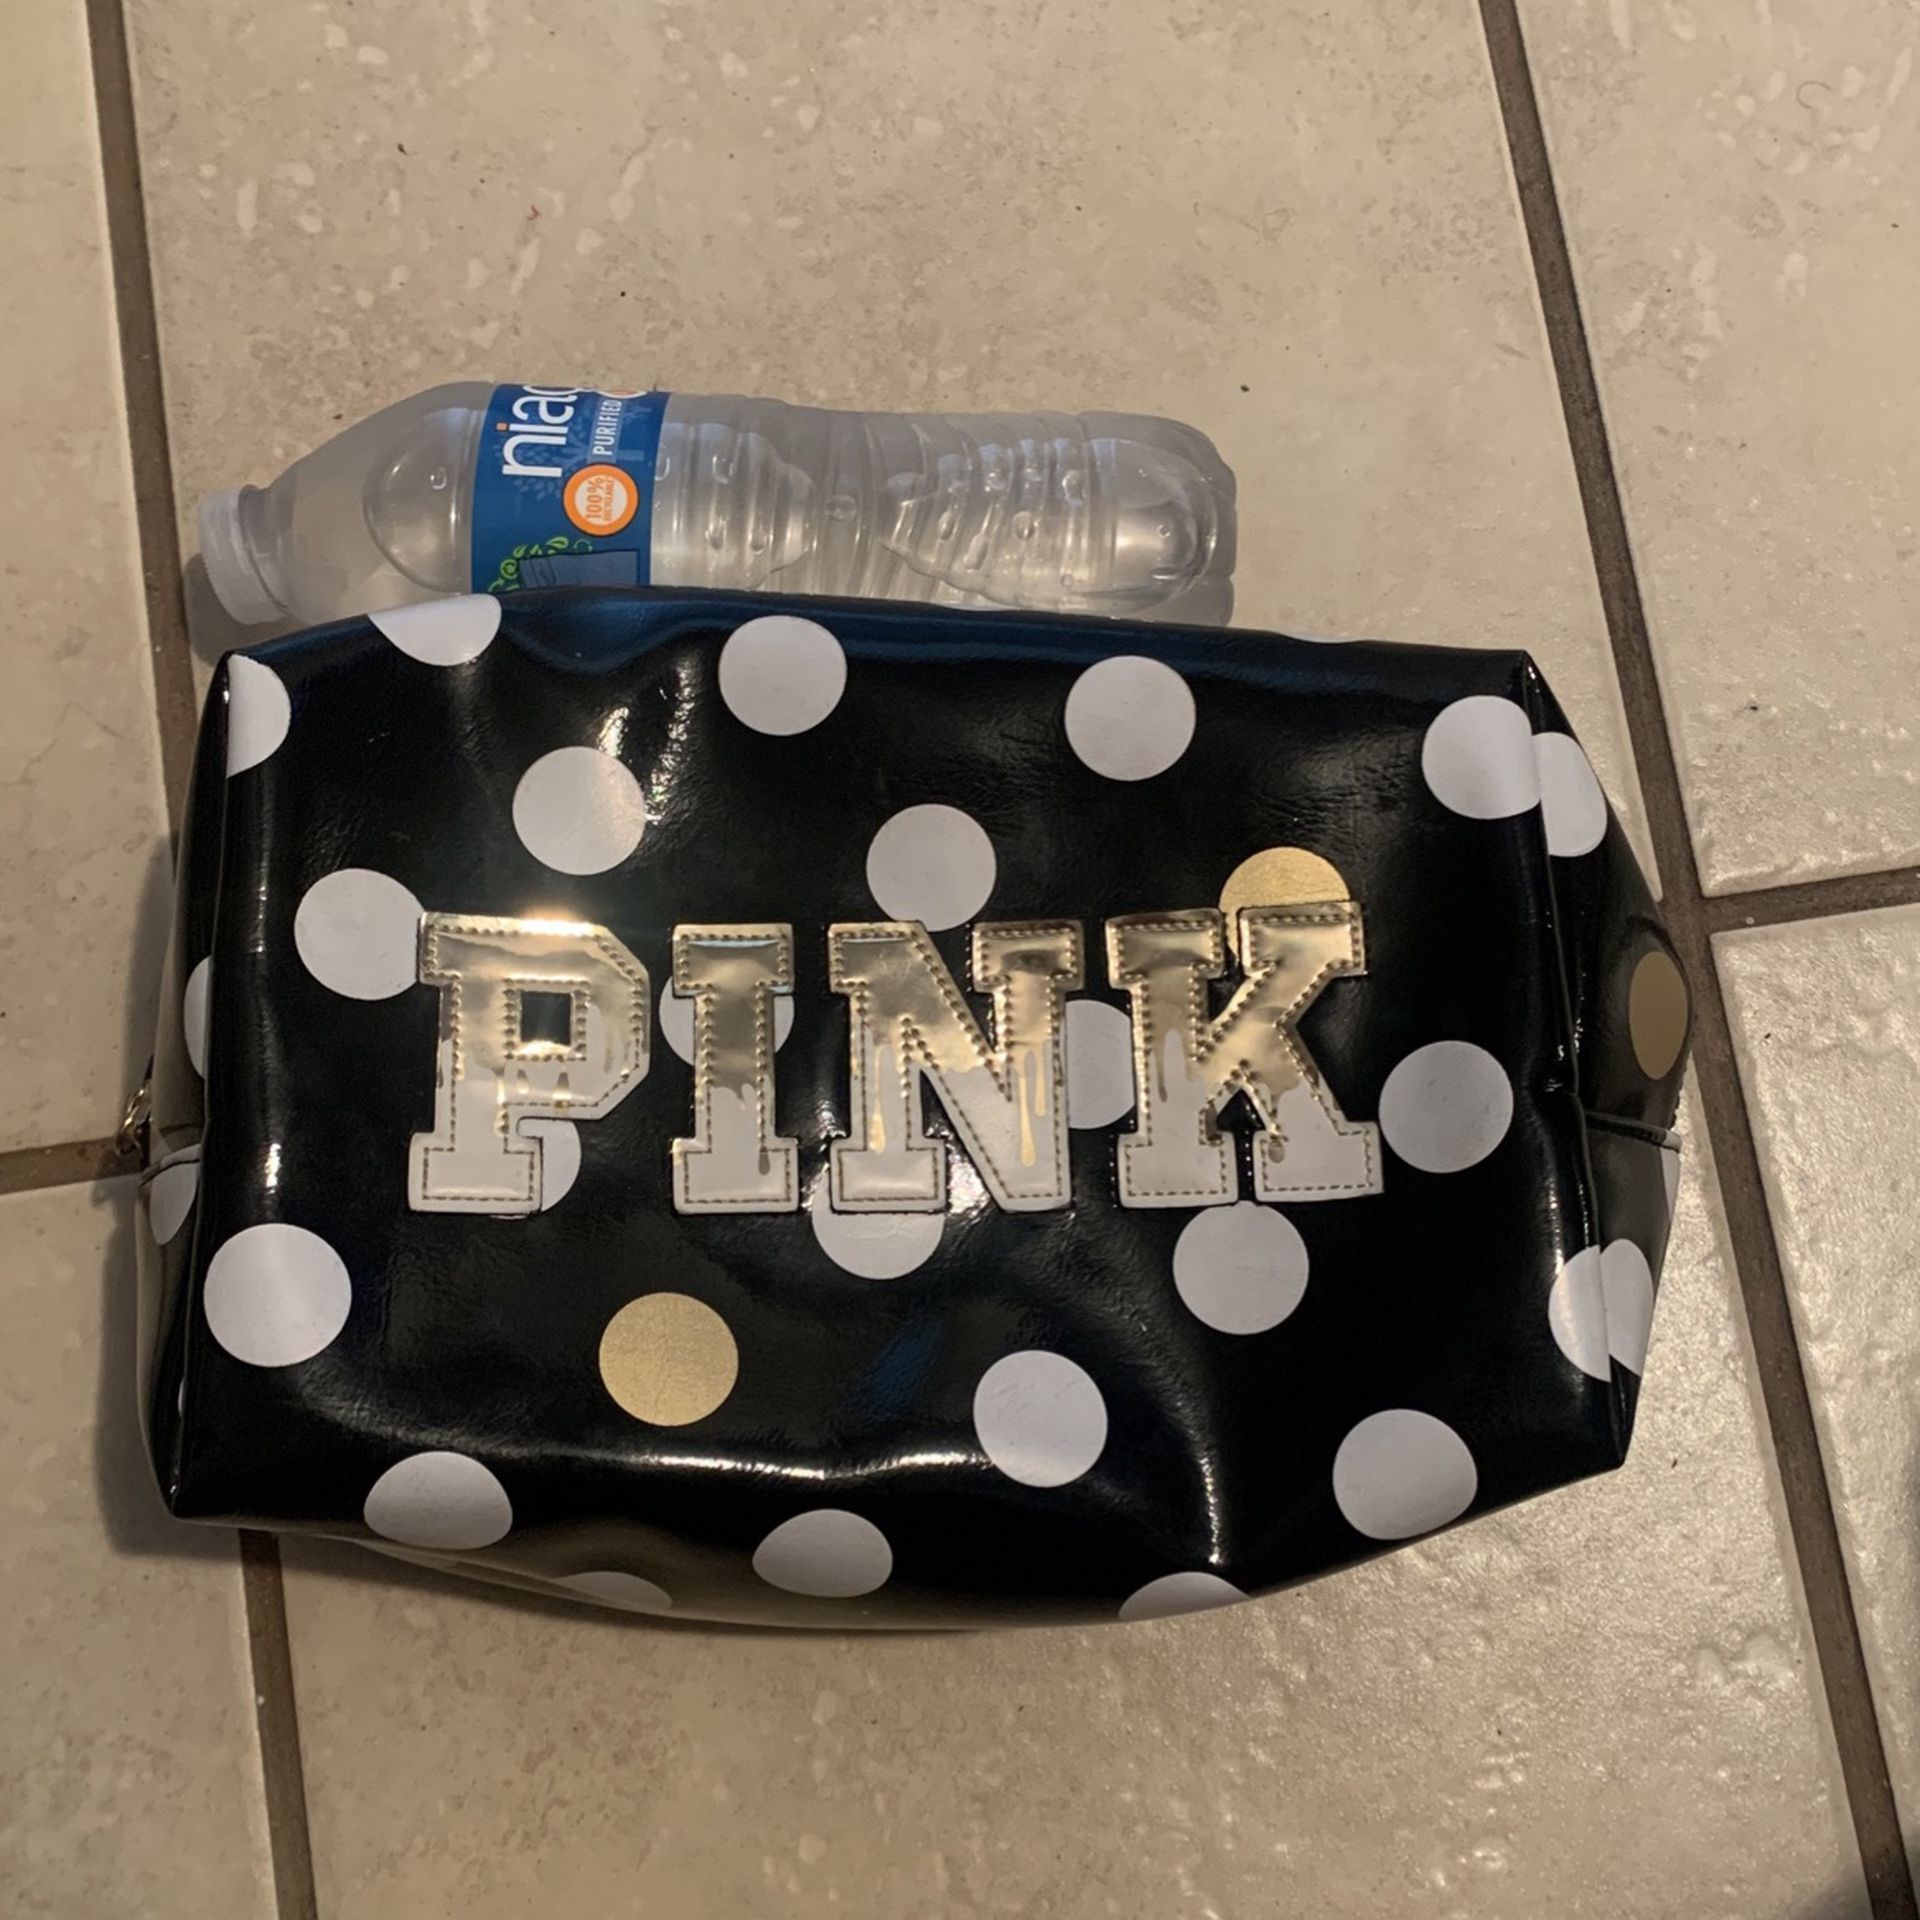 Designer Makeup Bag Travel Cosmetic Case for Sale in Brooklyn, NY - OfferUp